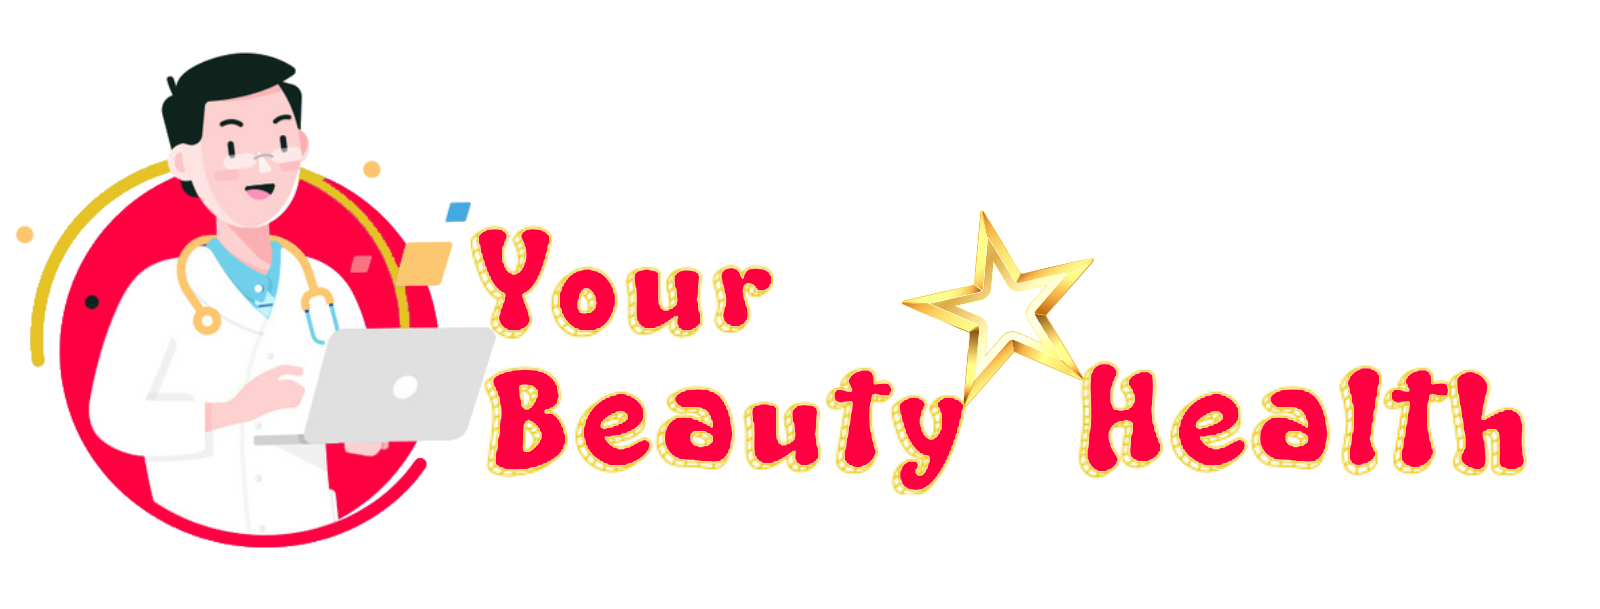 Your Beauty And Health